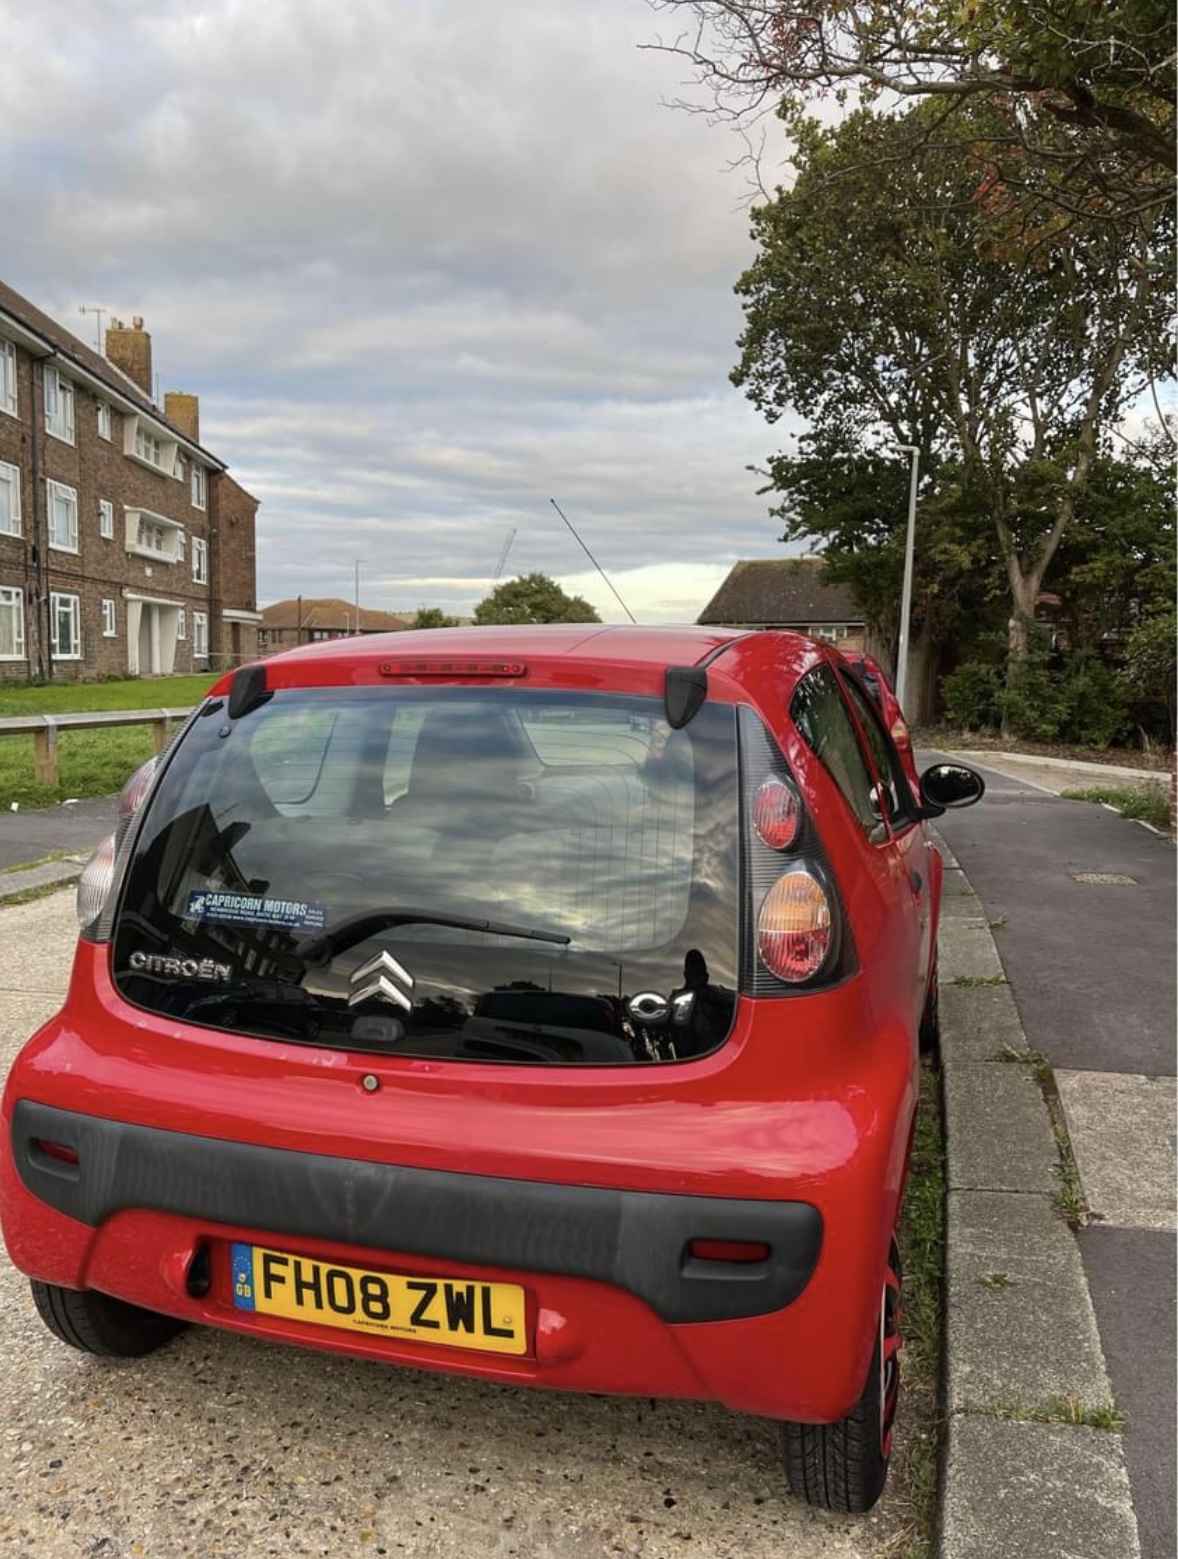 Photograph of FH08 ZWL - a Red Citroen C1 parked in Hollingdean by a non-resident and stored here whilst a dodgy car dealer attempts to sell it. The fourth of five photographs supplied by the residents of Hollingdean.